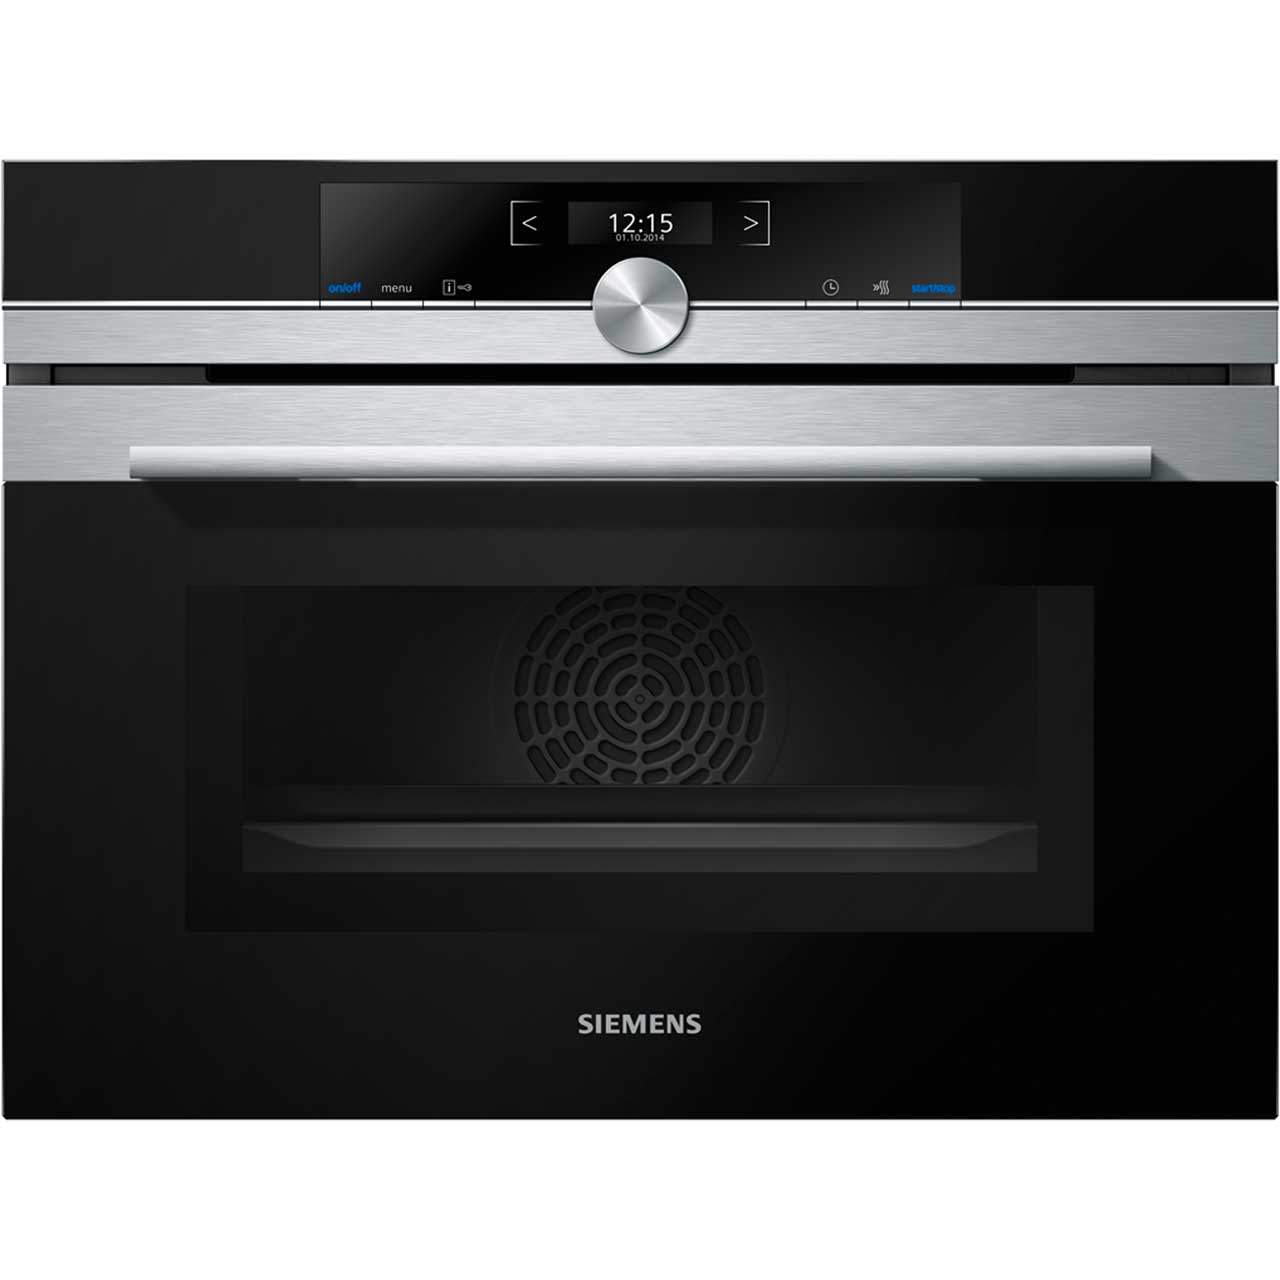 Siemens IQ-700 CM633GBS1B Integrated Microwave Oven in Stainless Steel